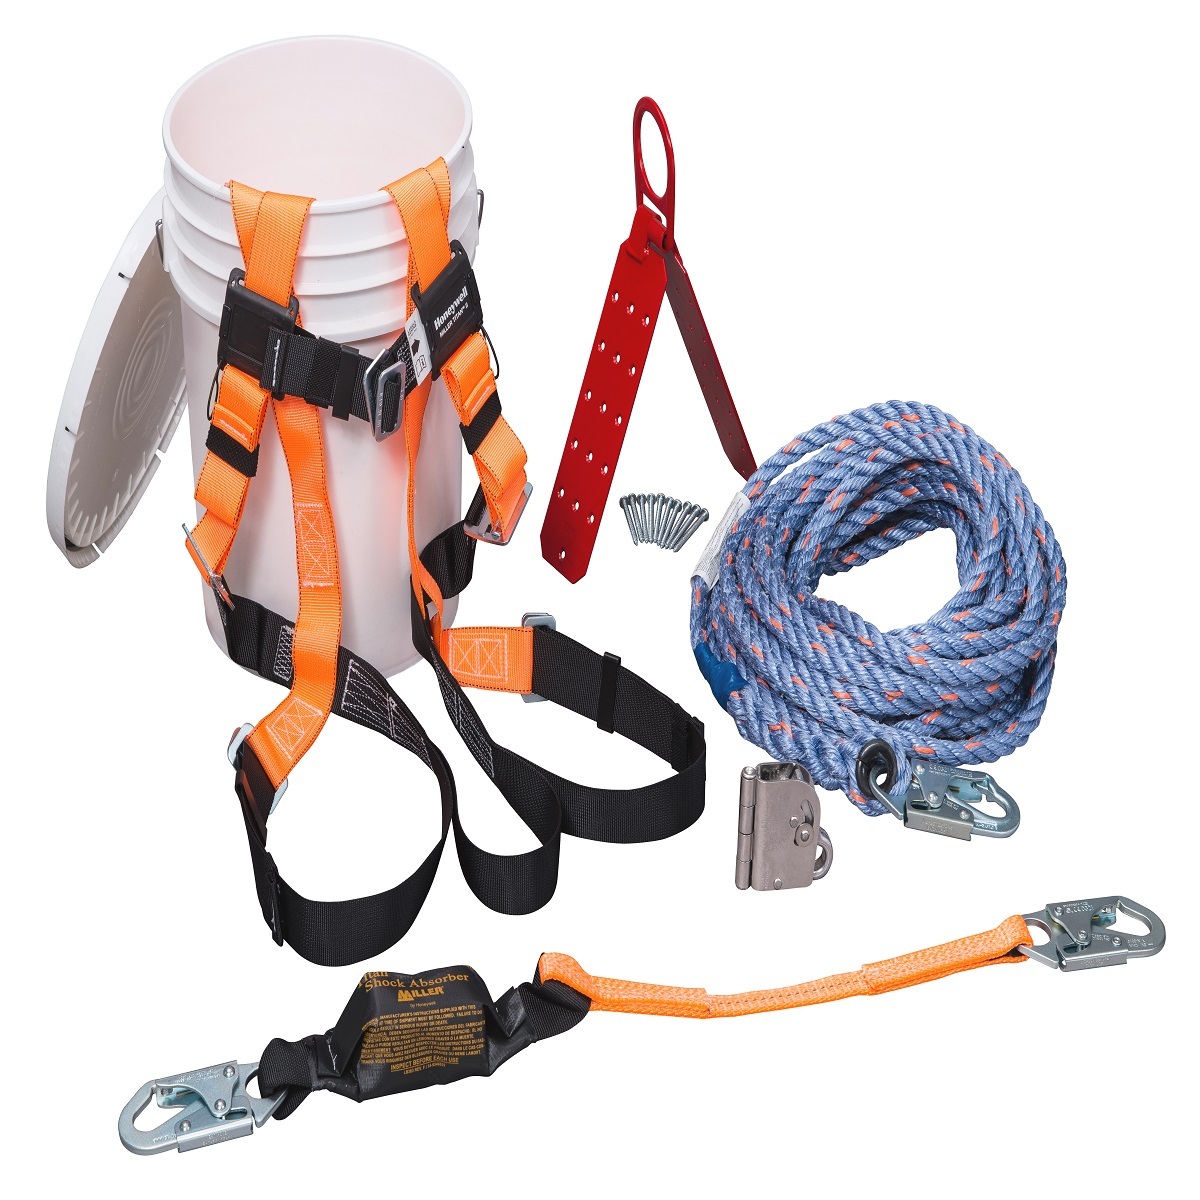 Honeywell Miller® Titan™ II ReadyRoofer® Roofer's Fall Protection Kit (Includes Lifeline, Harness, Anchor, Shock-Absorbing Lanya